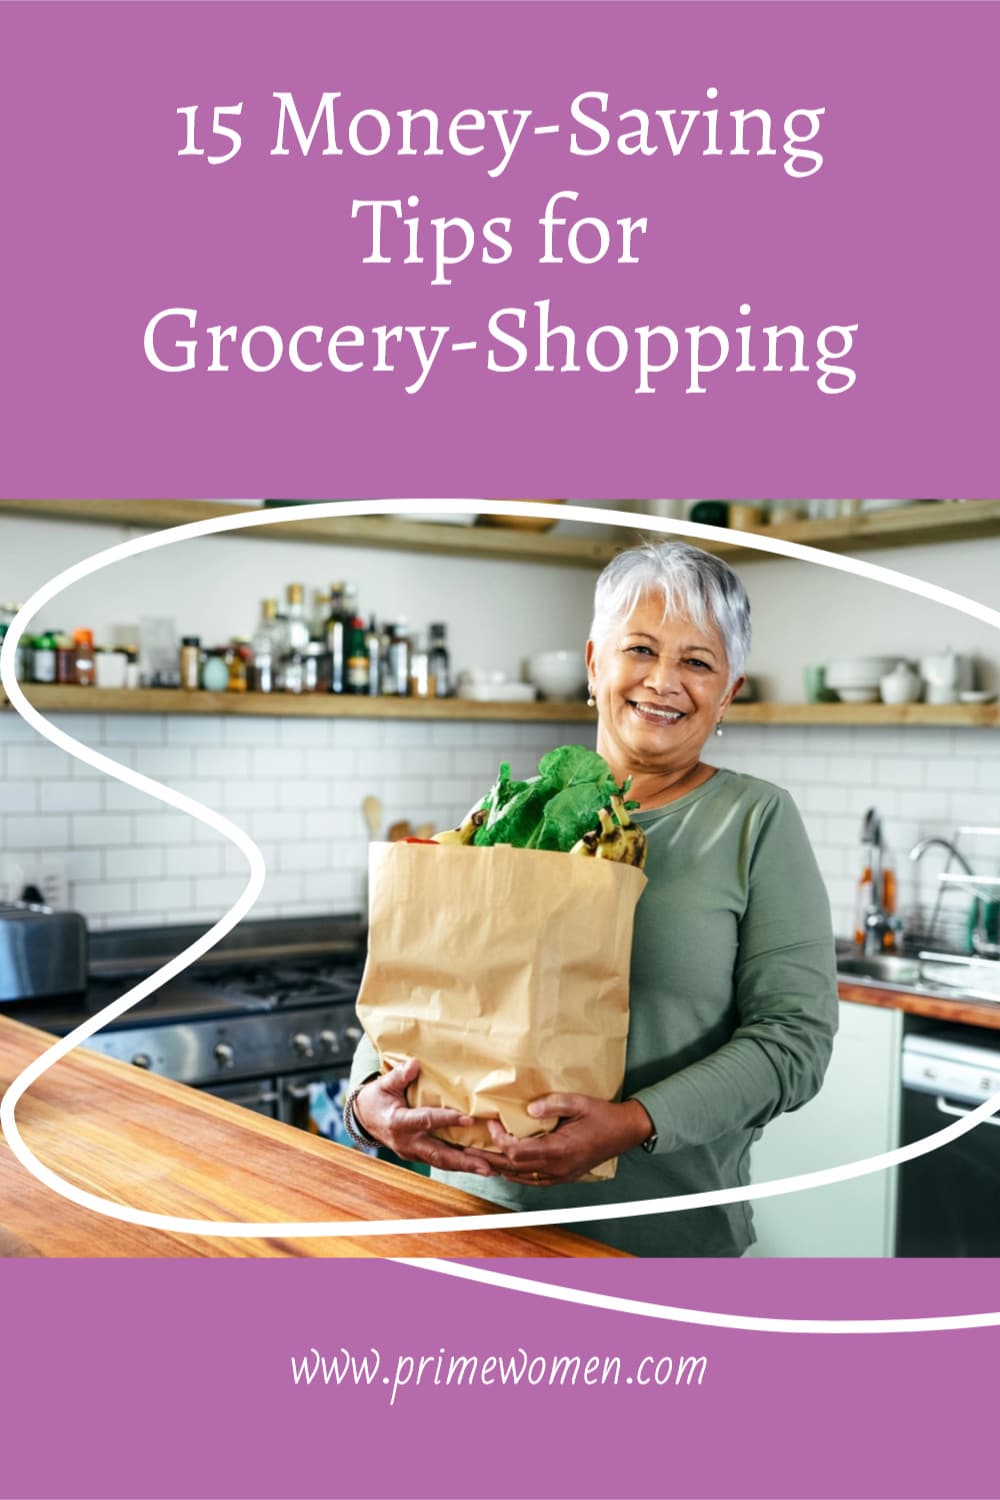 15-Money-Saving-Tips-for-Grocery-Shopping